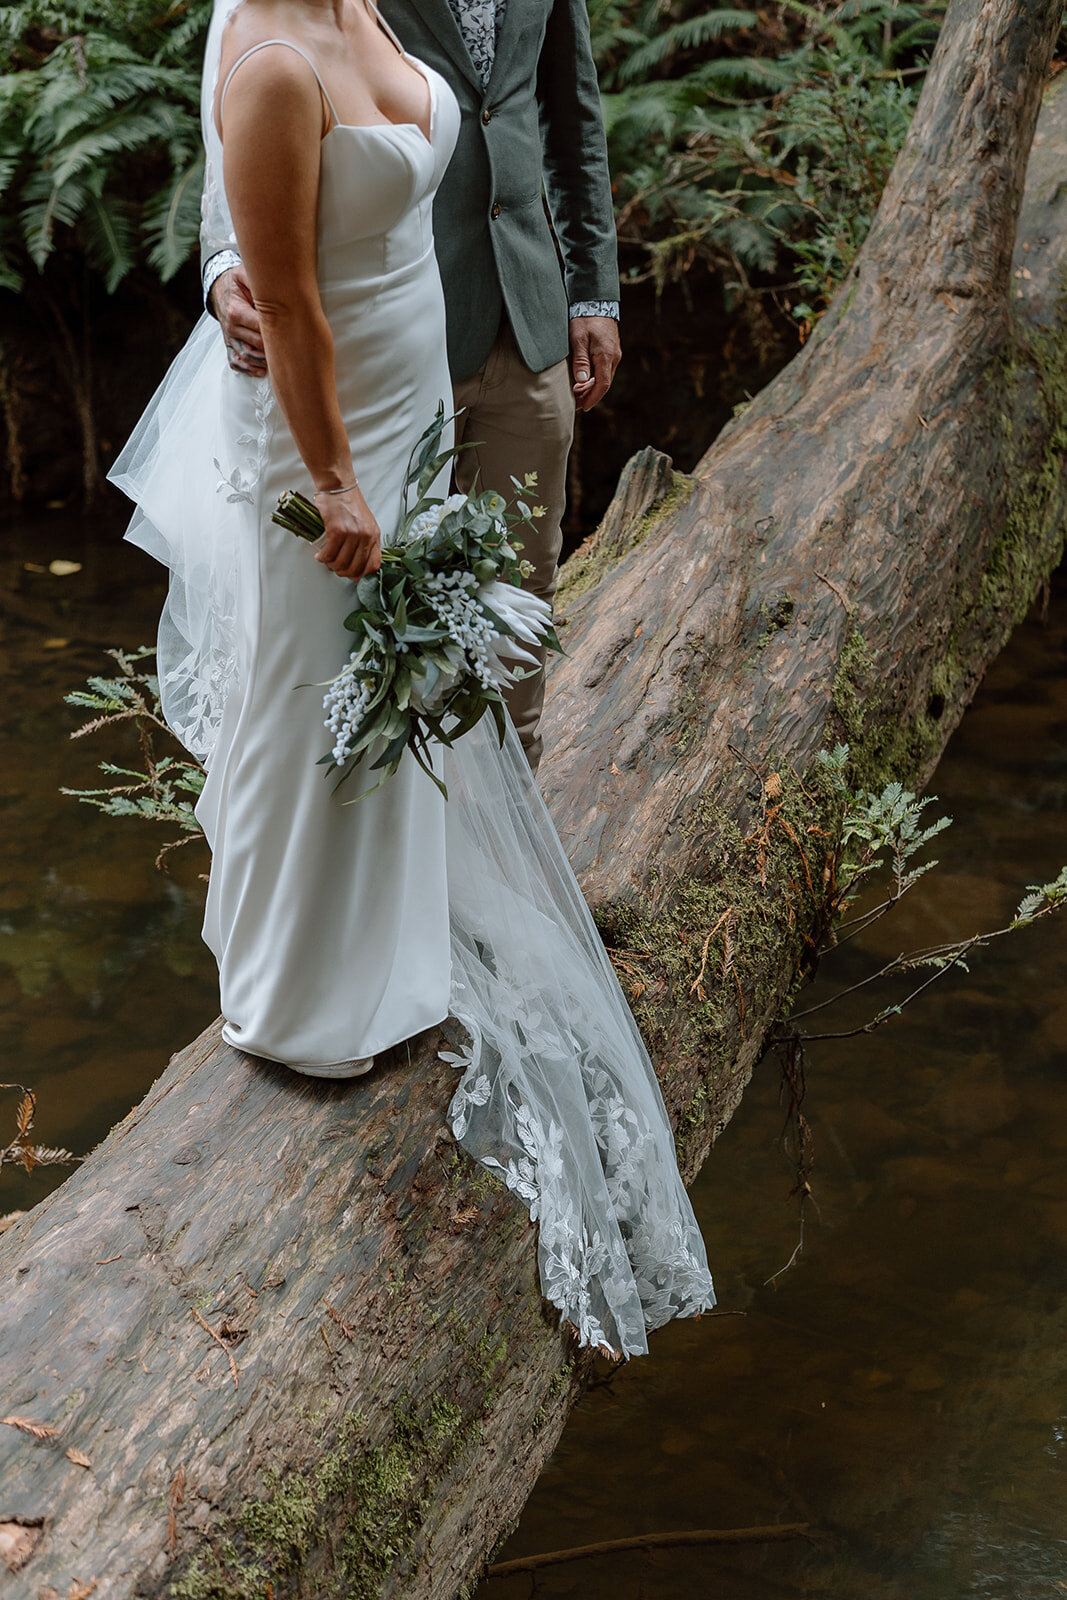 Stacey&Cory-Coast&Pines-391